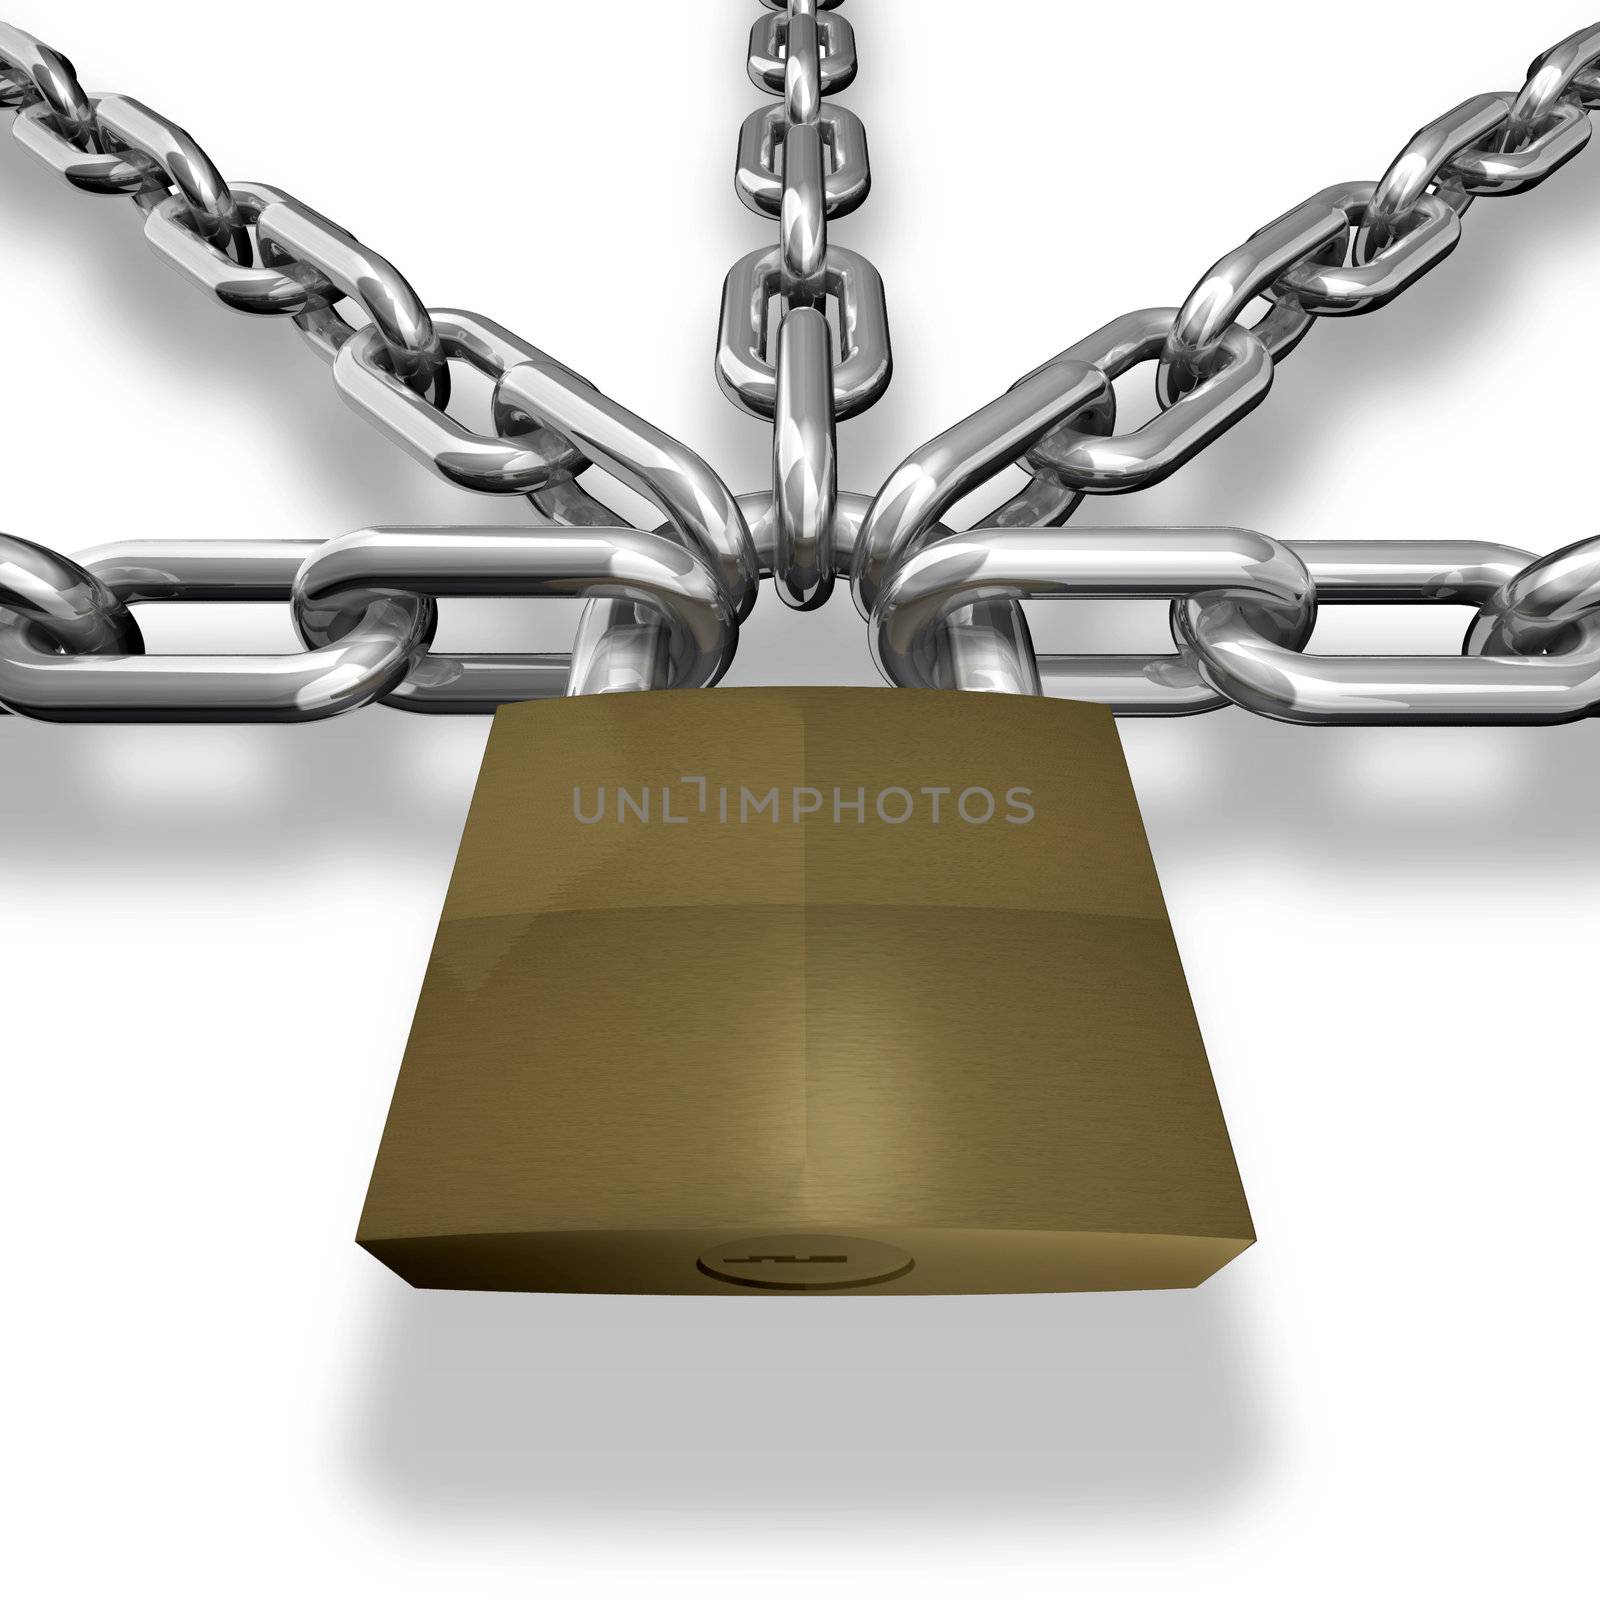 Group of silver chain closed with a lock - security or teamwork concept